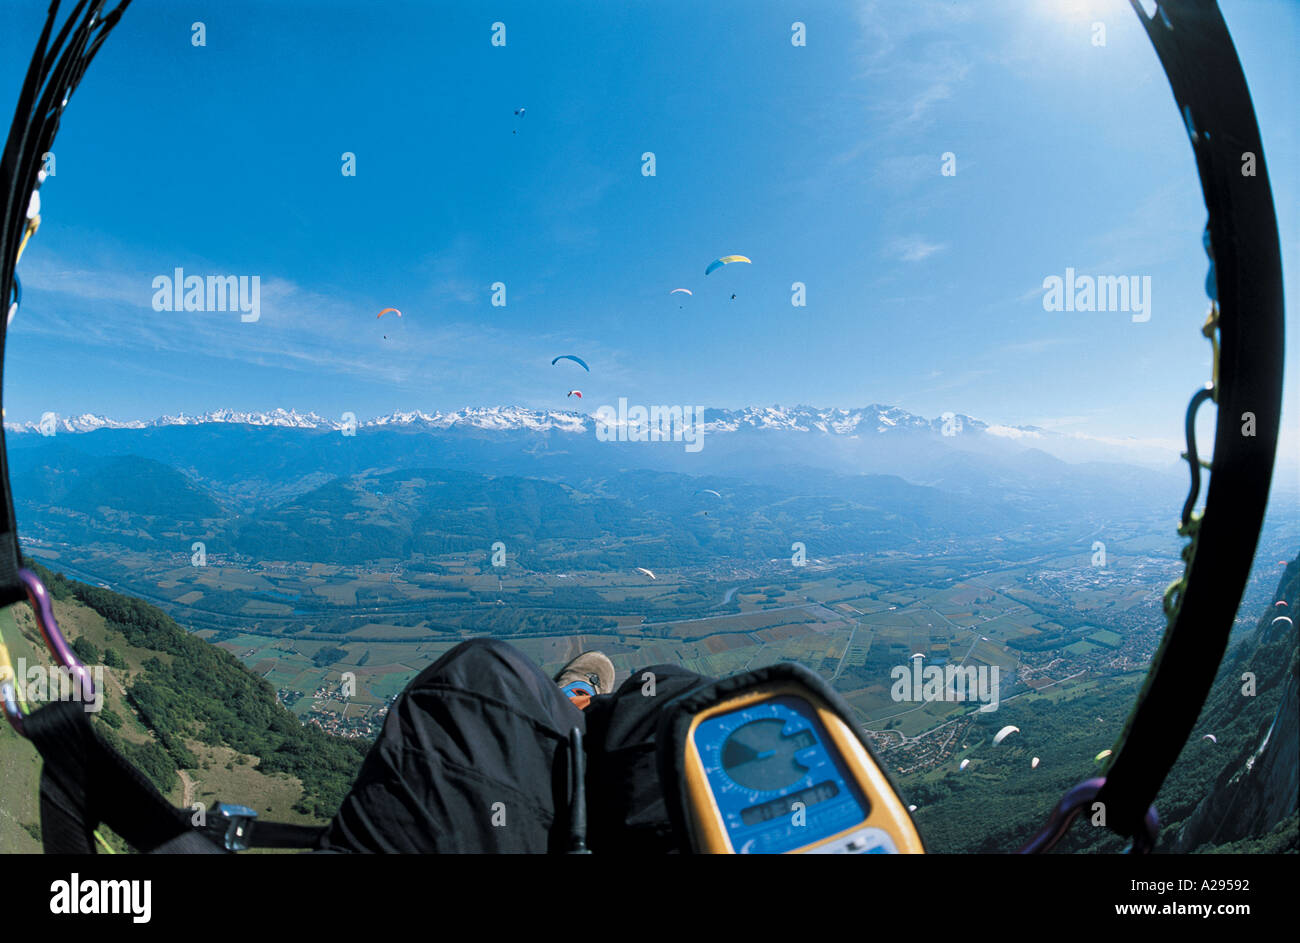 Panoramic shot of paragliding above the alps France showing altimeter Stock Photo